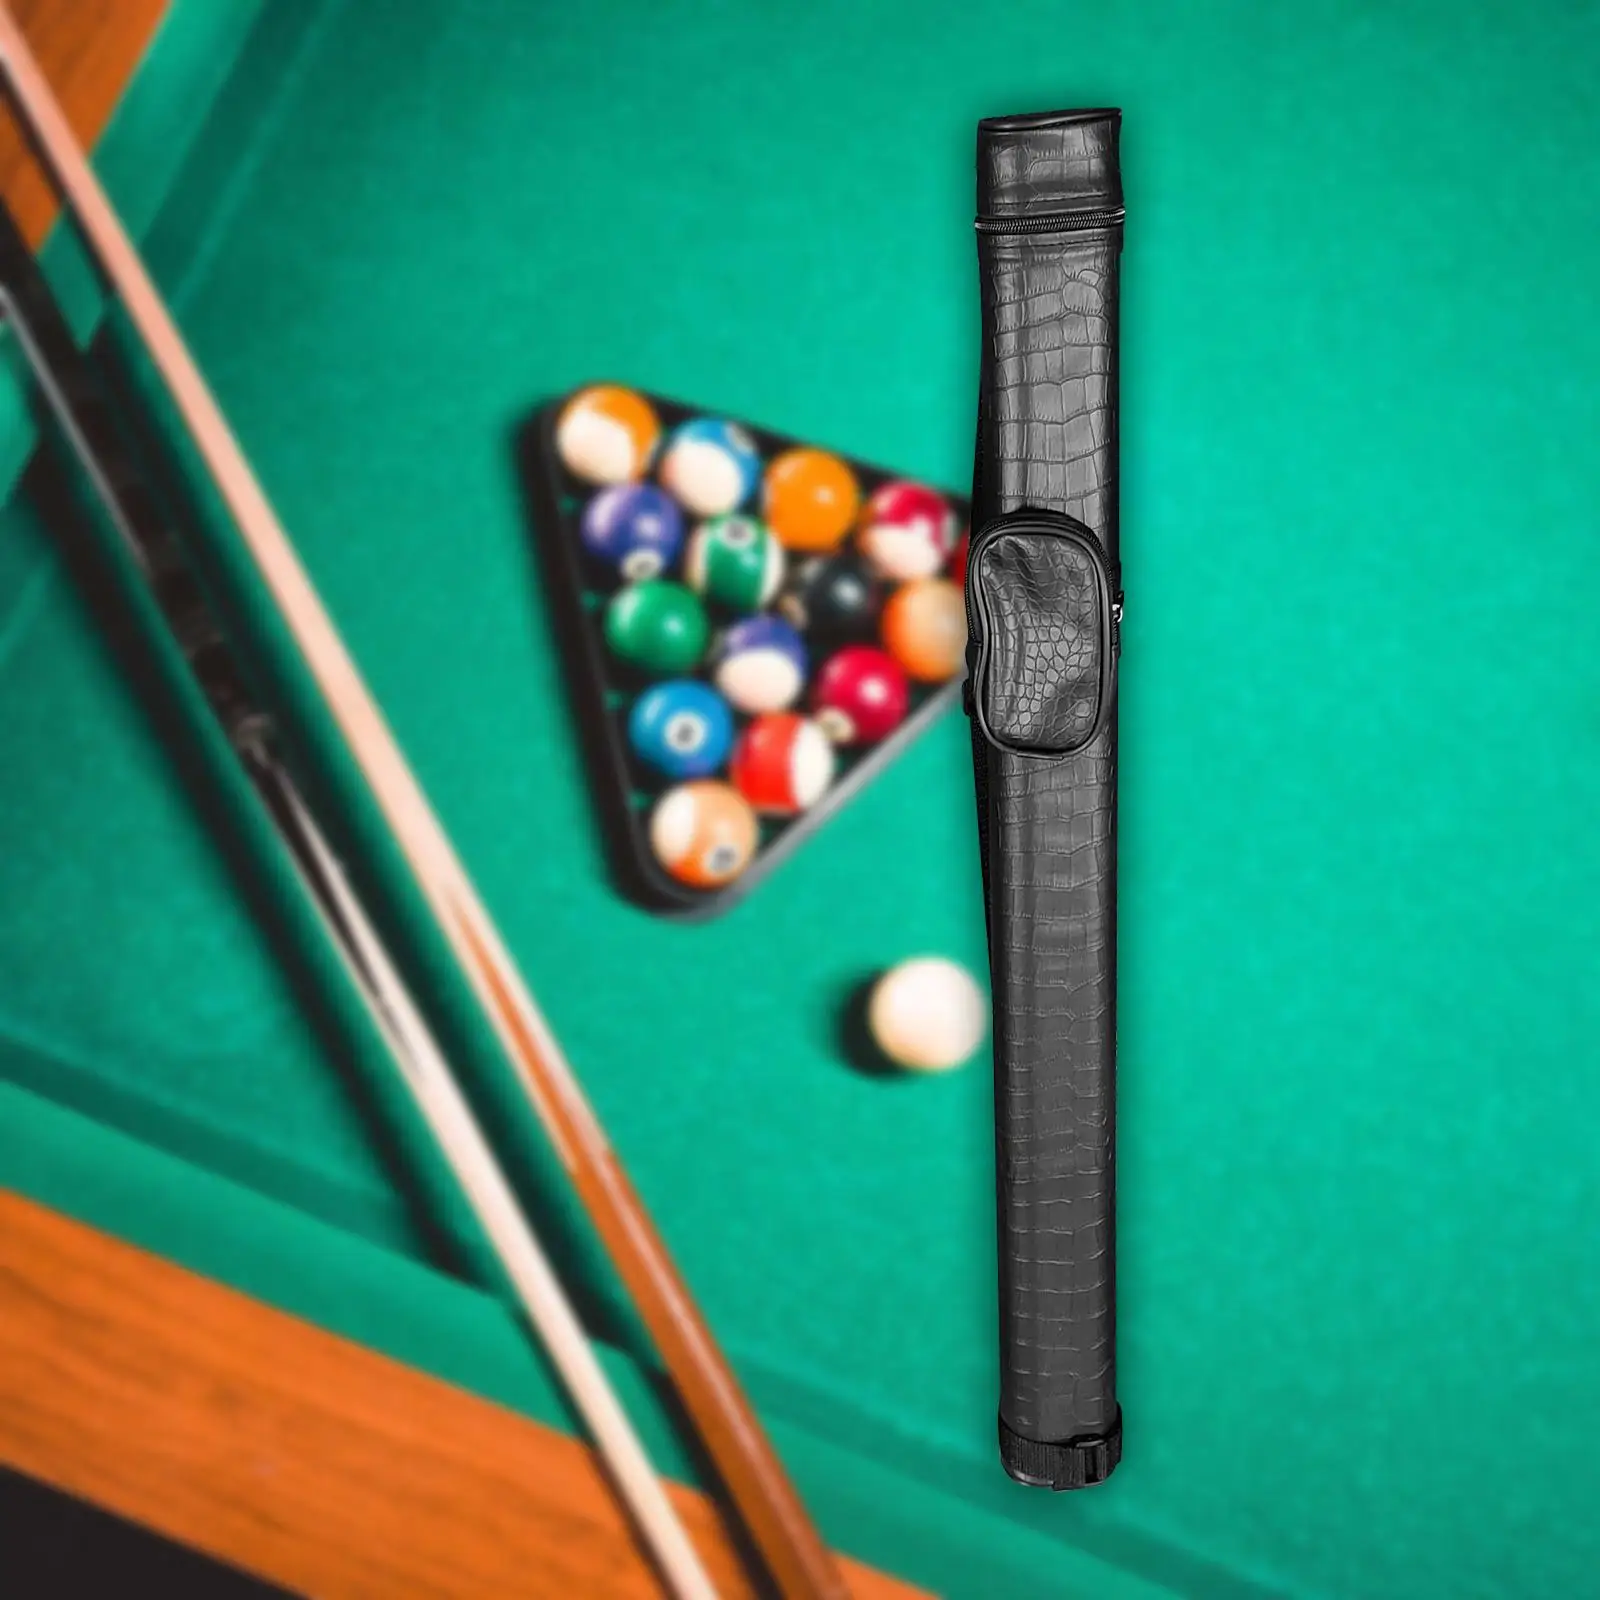 Pool Classic 1 Complete 2 Pieces Cue for Sports Billiard Room Black